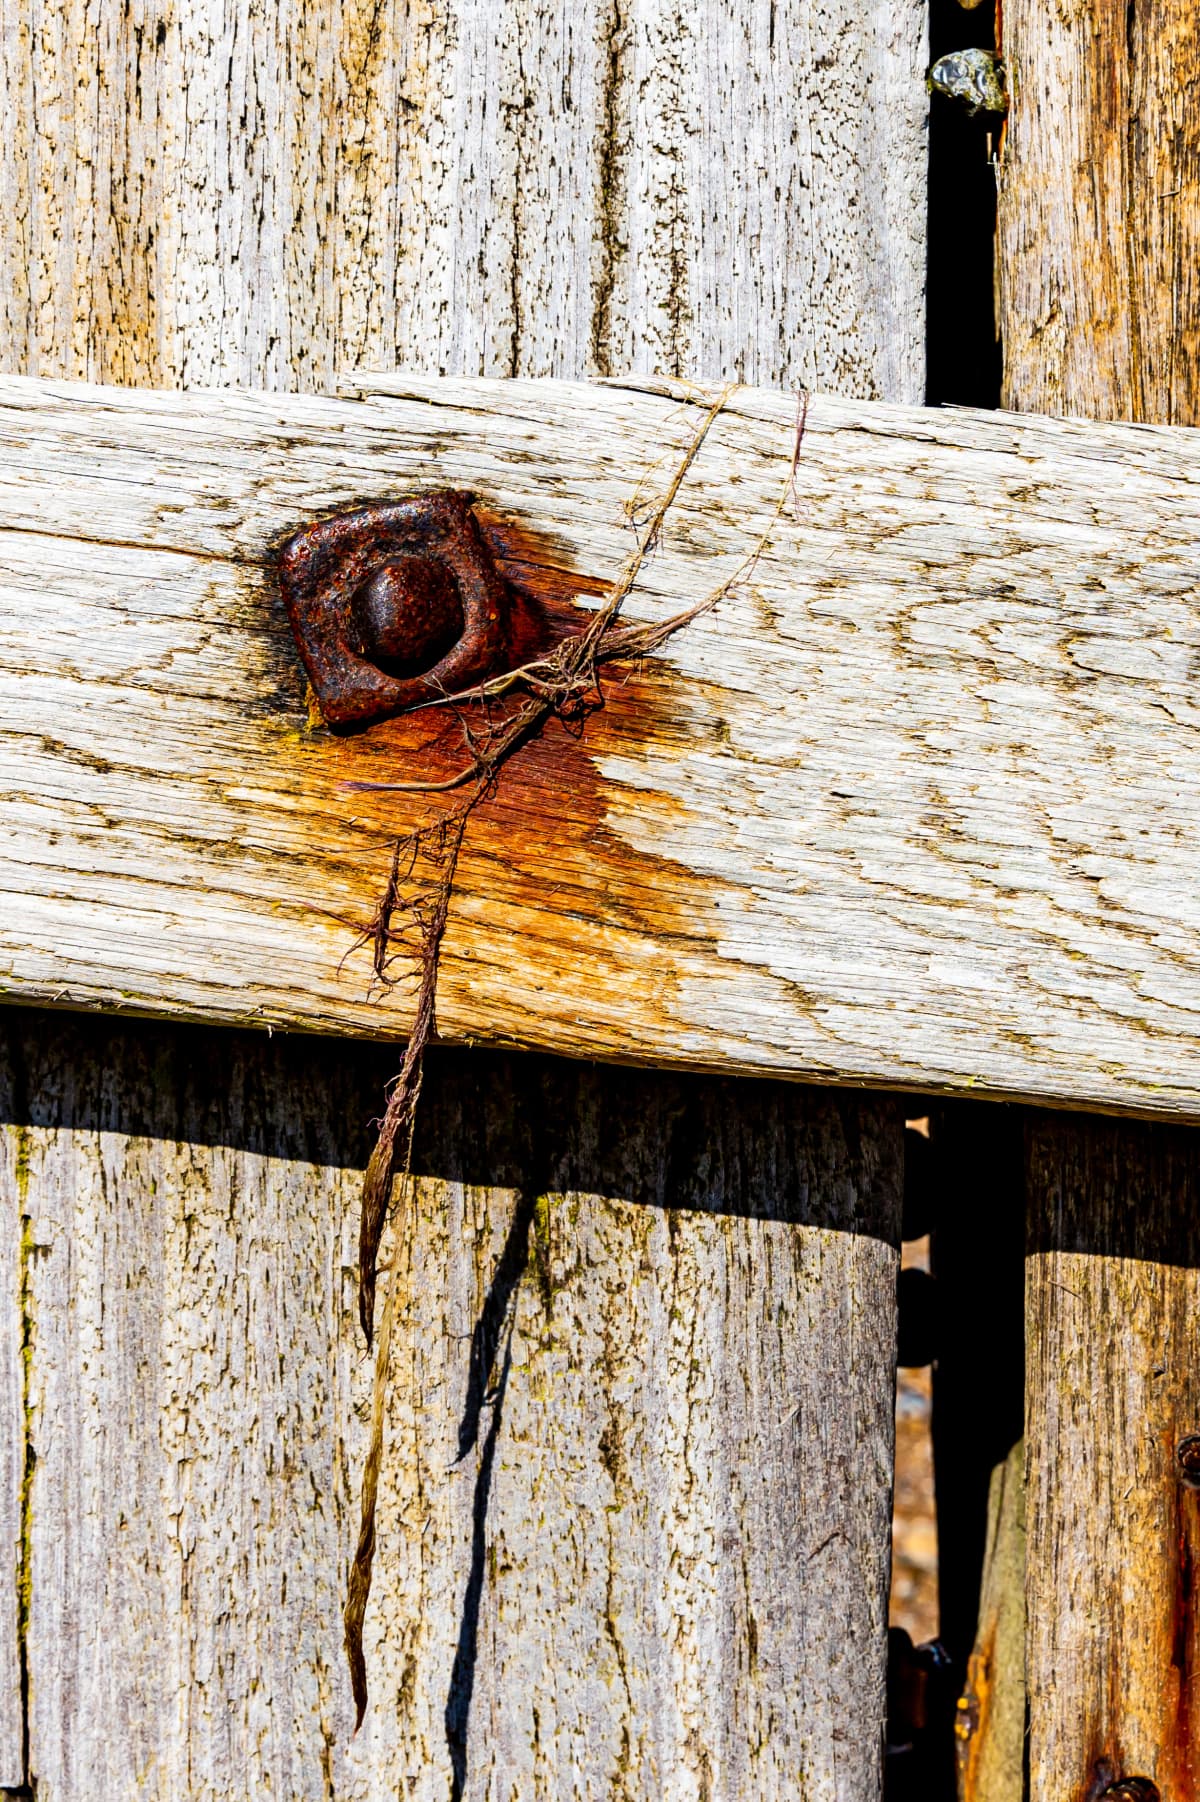 Weathered wooden posts and rusted bolts